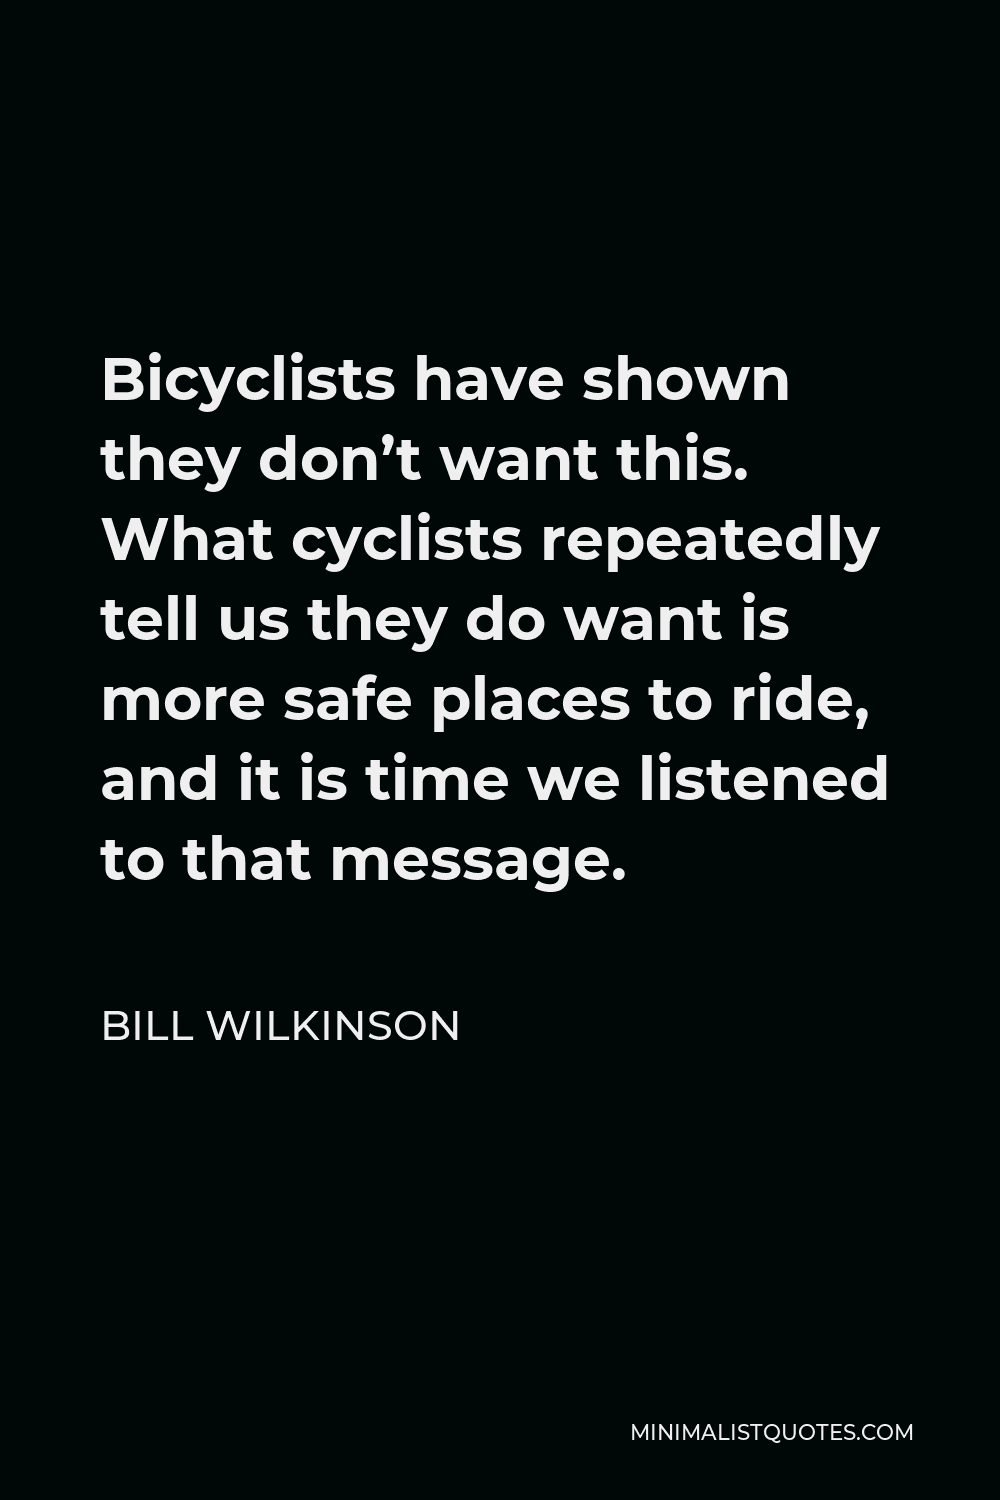 Bill Wilkinson Quote - Bicyclists have shown they don’t want this. What cyclists repeatedly tell us they do want is more safe places to ride, and it is time we listened to that message.